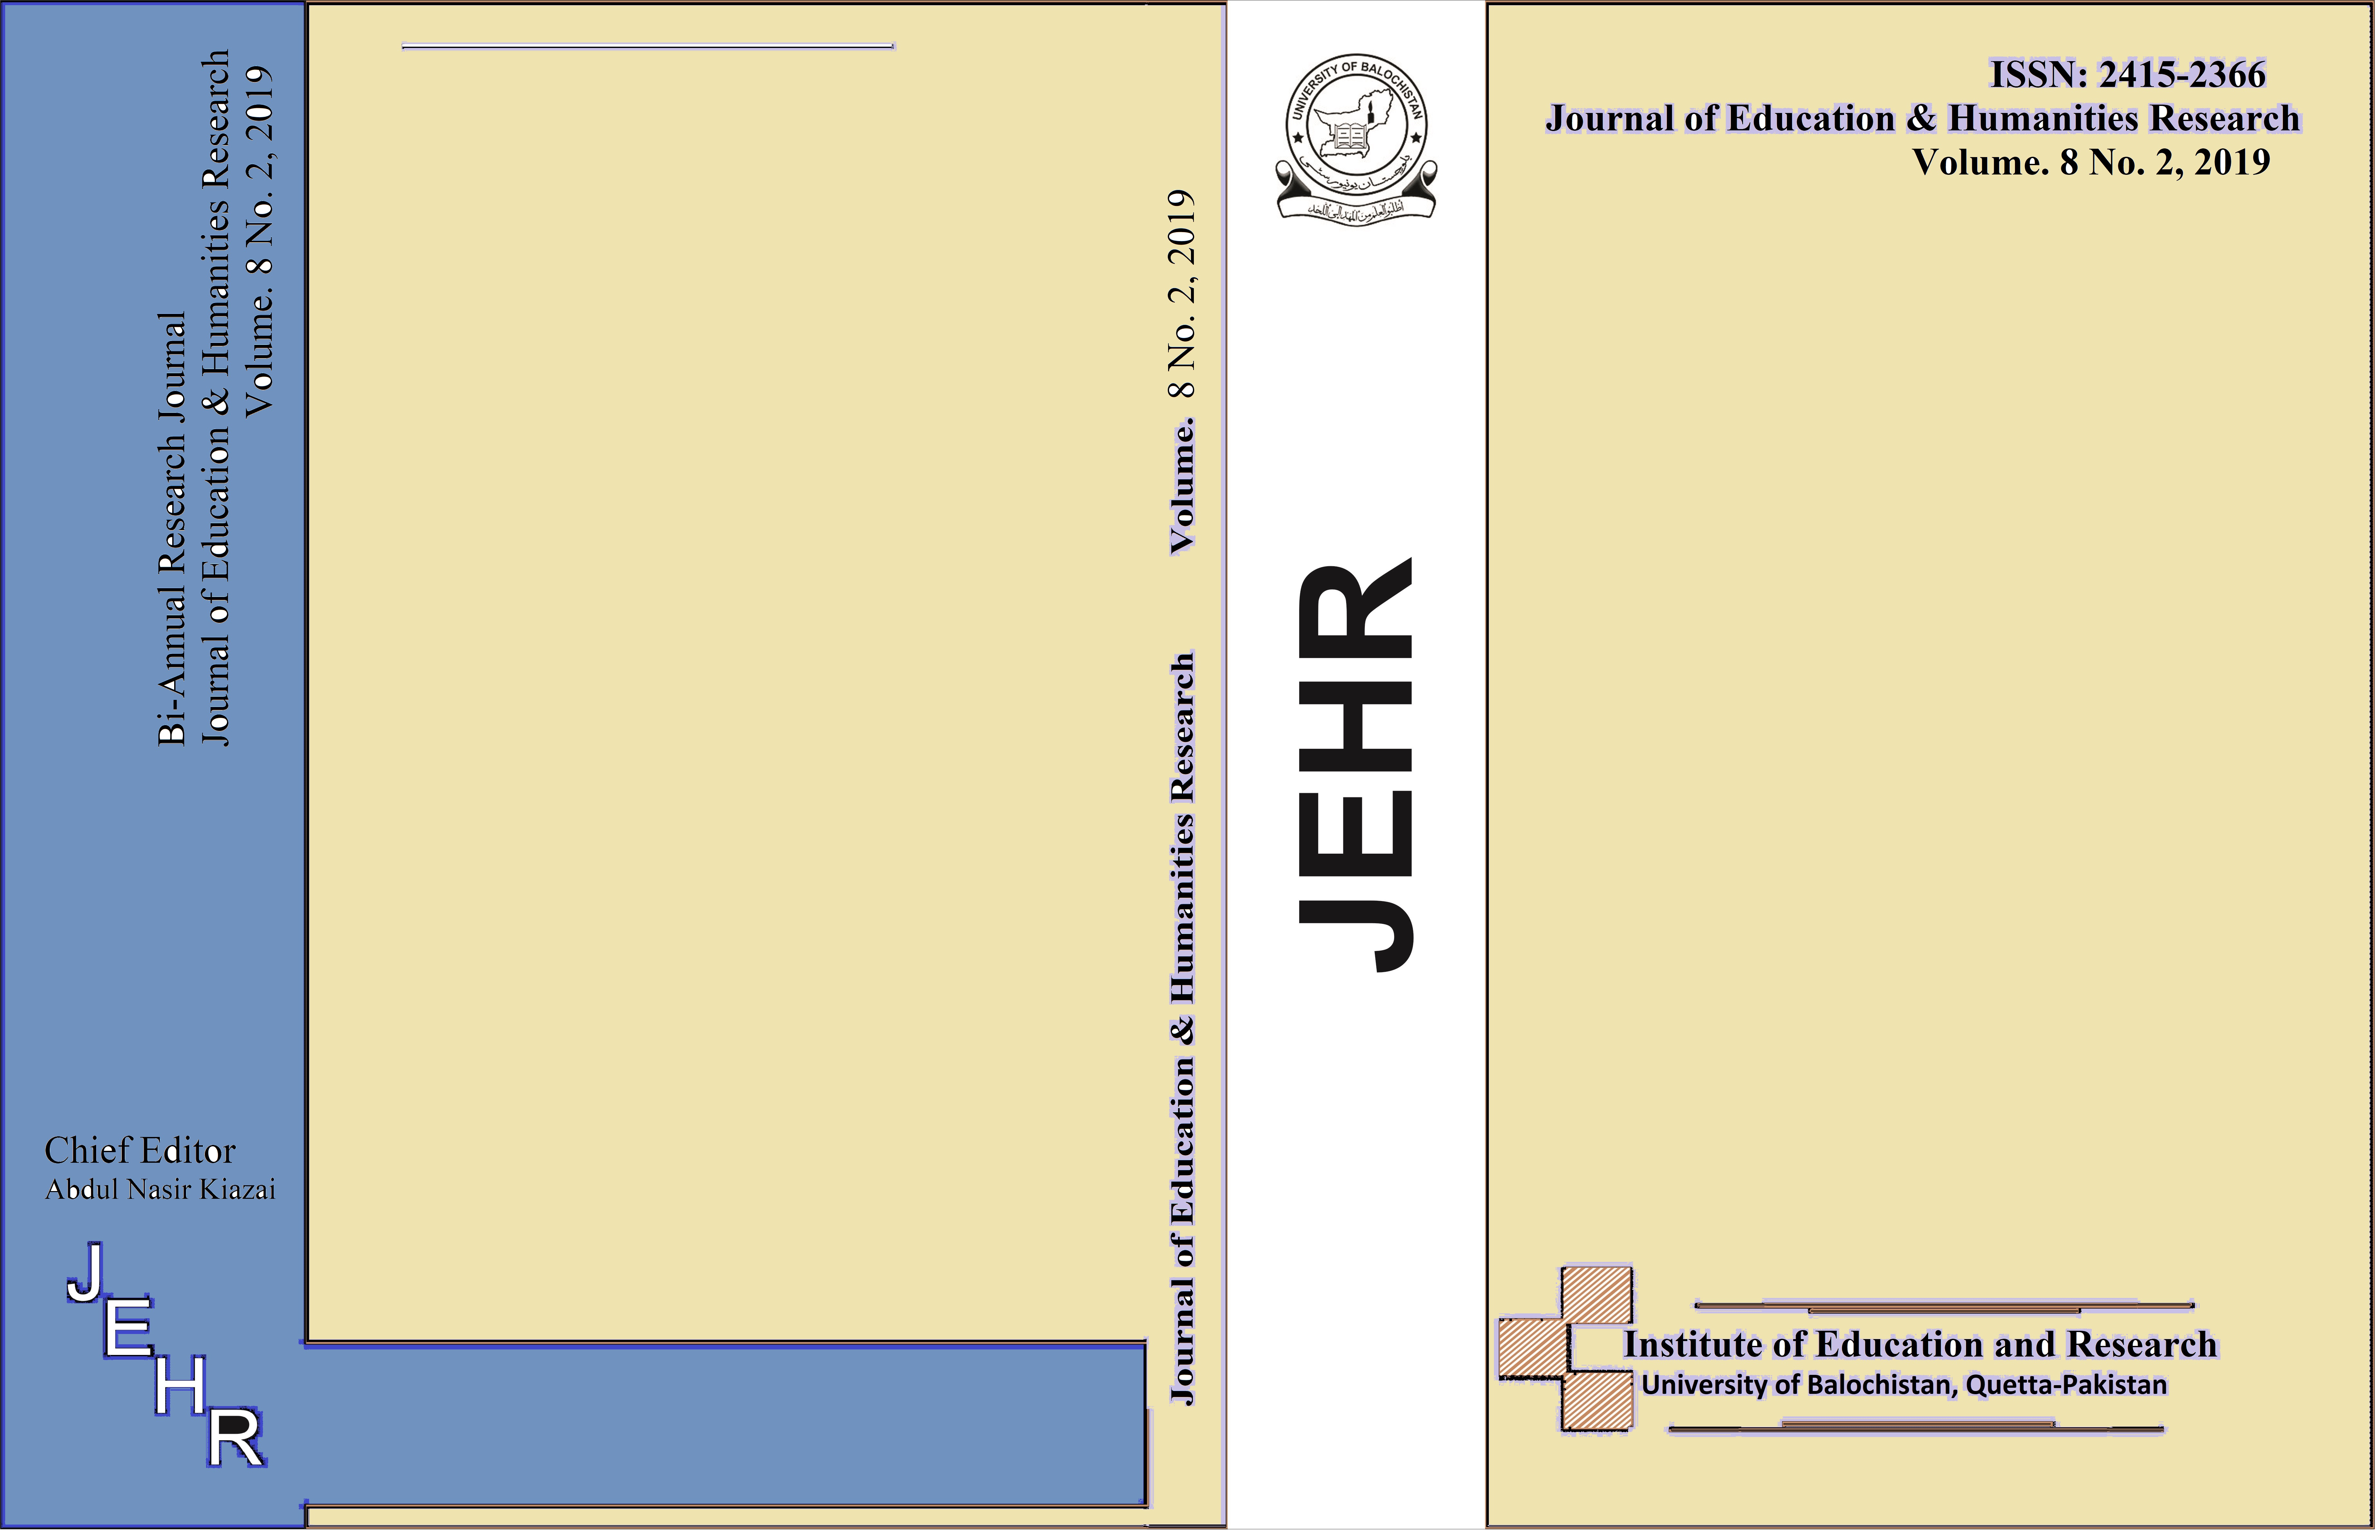 					View Vol. 8 No. II (2019): Journal of Education And Humanities Research, University of Balochistan 
				